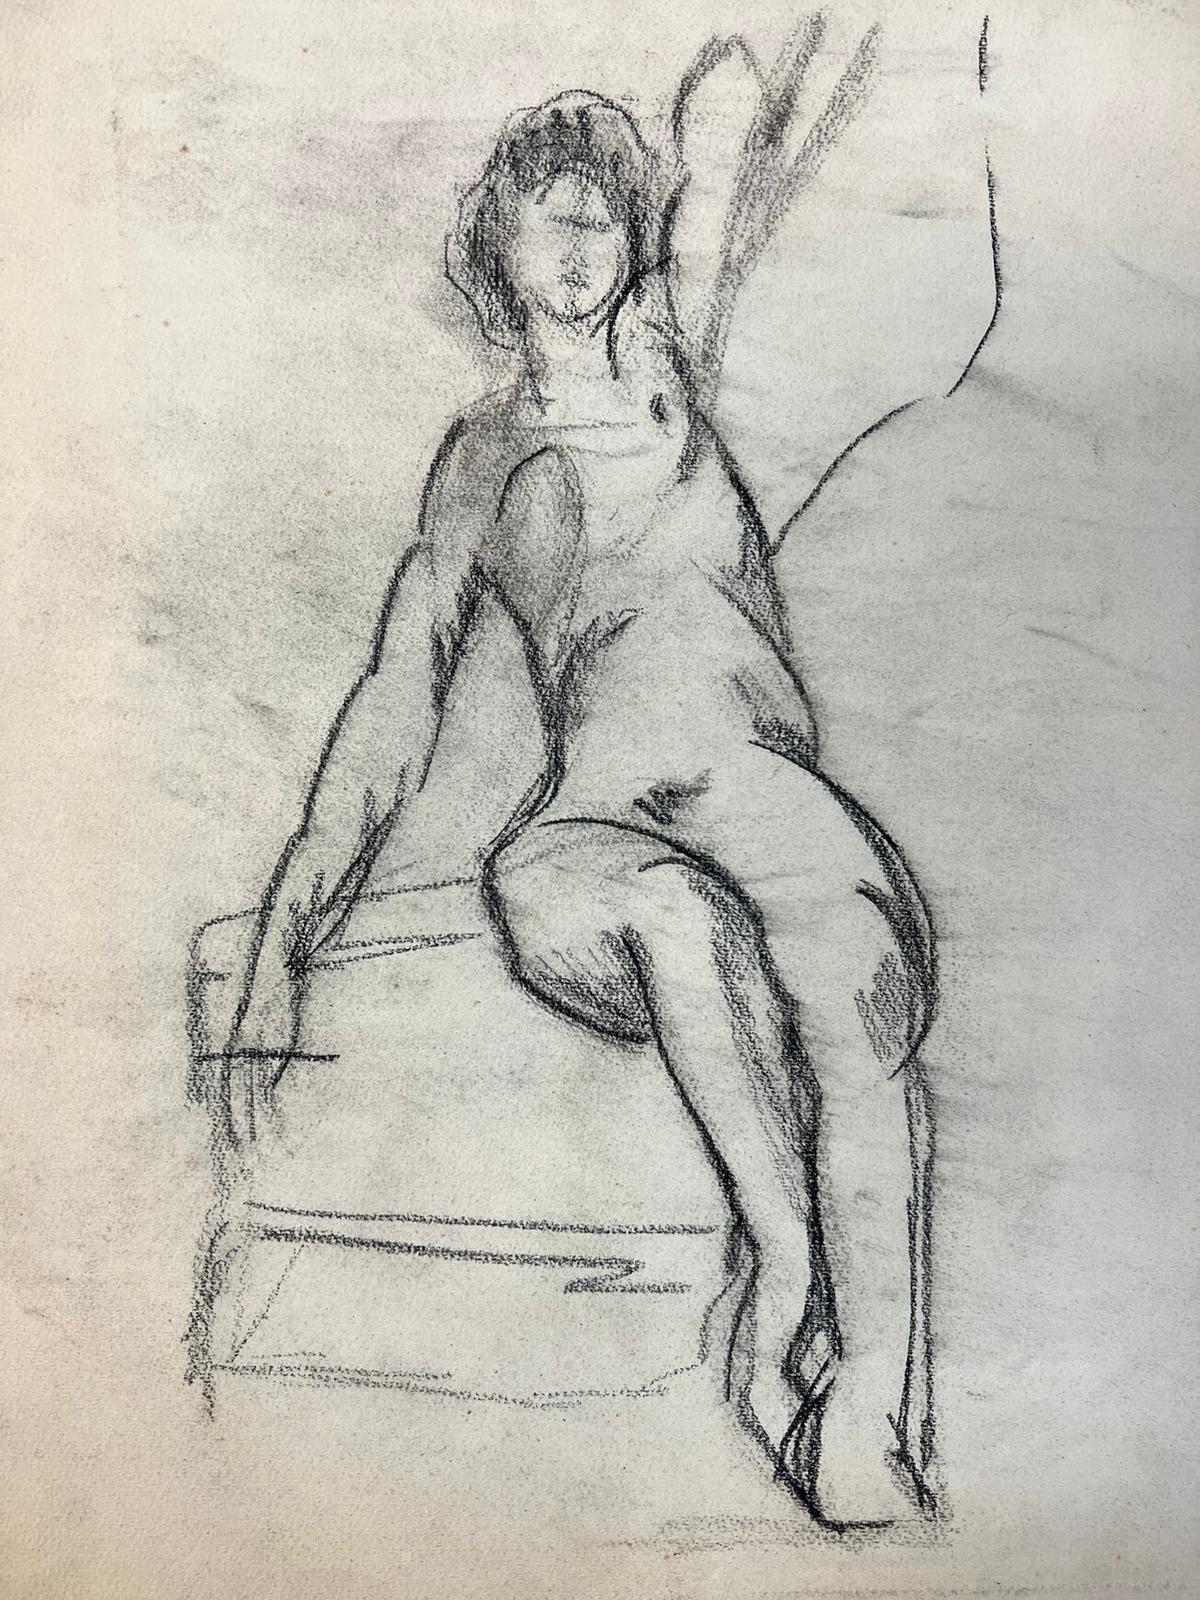 ""
by Geneviève Zondervan (French 1922-2013)
pencil/charcoal drawing on paper
in a folded A3 paper with other drawings on

paper: 12.5 x 9 inches

Superb mid-century oil painting on board by the French artist, Geneviève Zondervan (French 1922-2013).